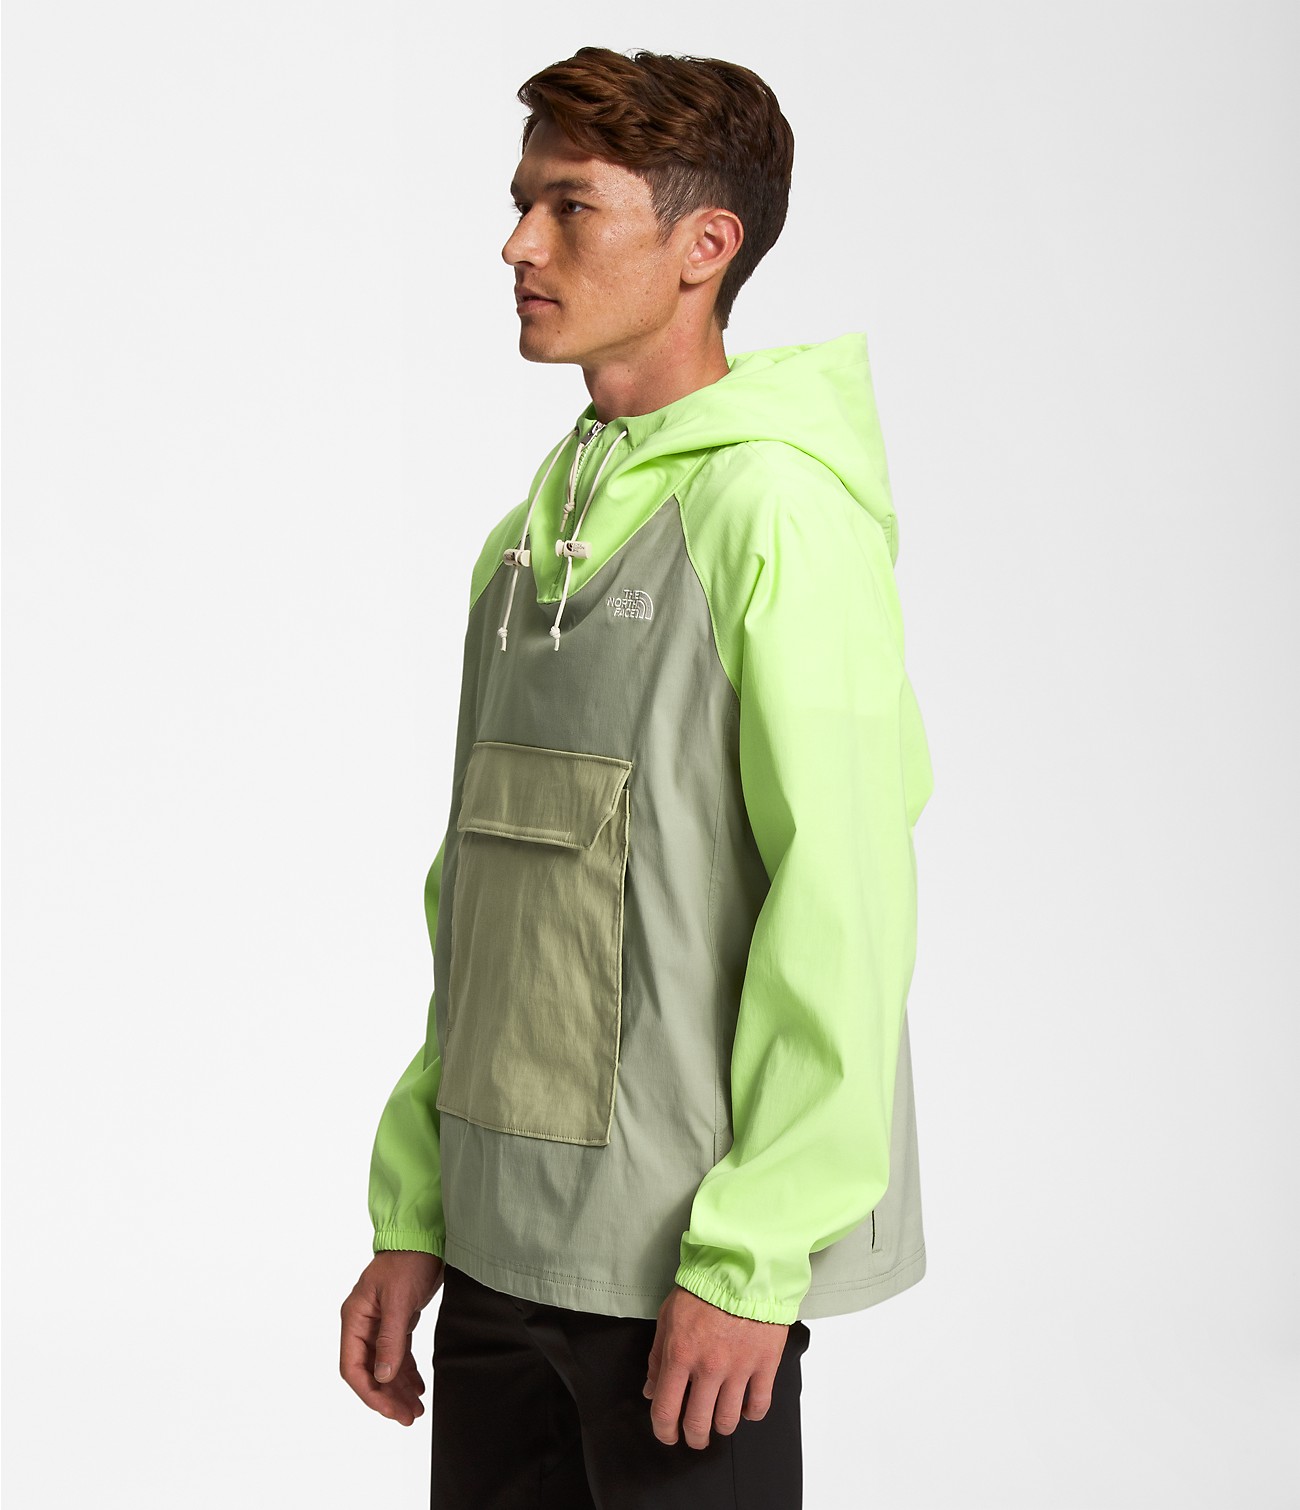 Men’s Class V Pullover | The North Face